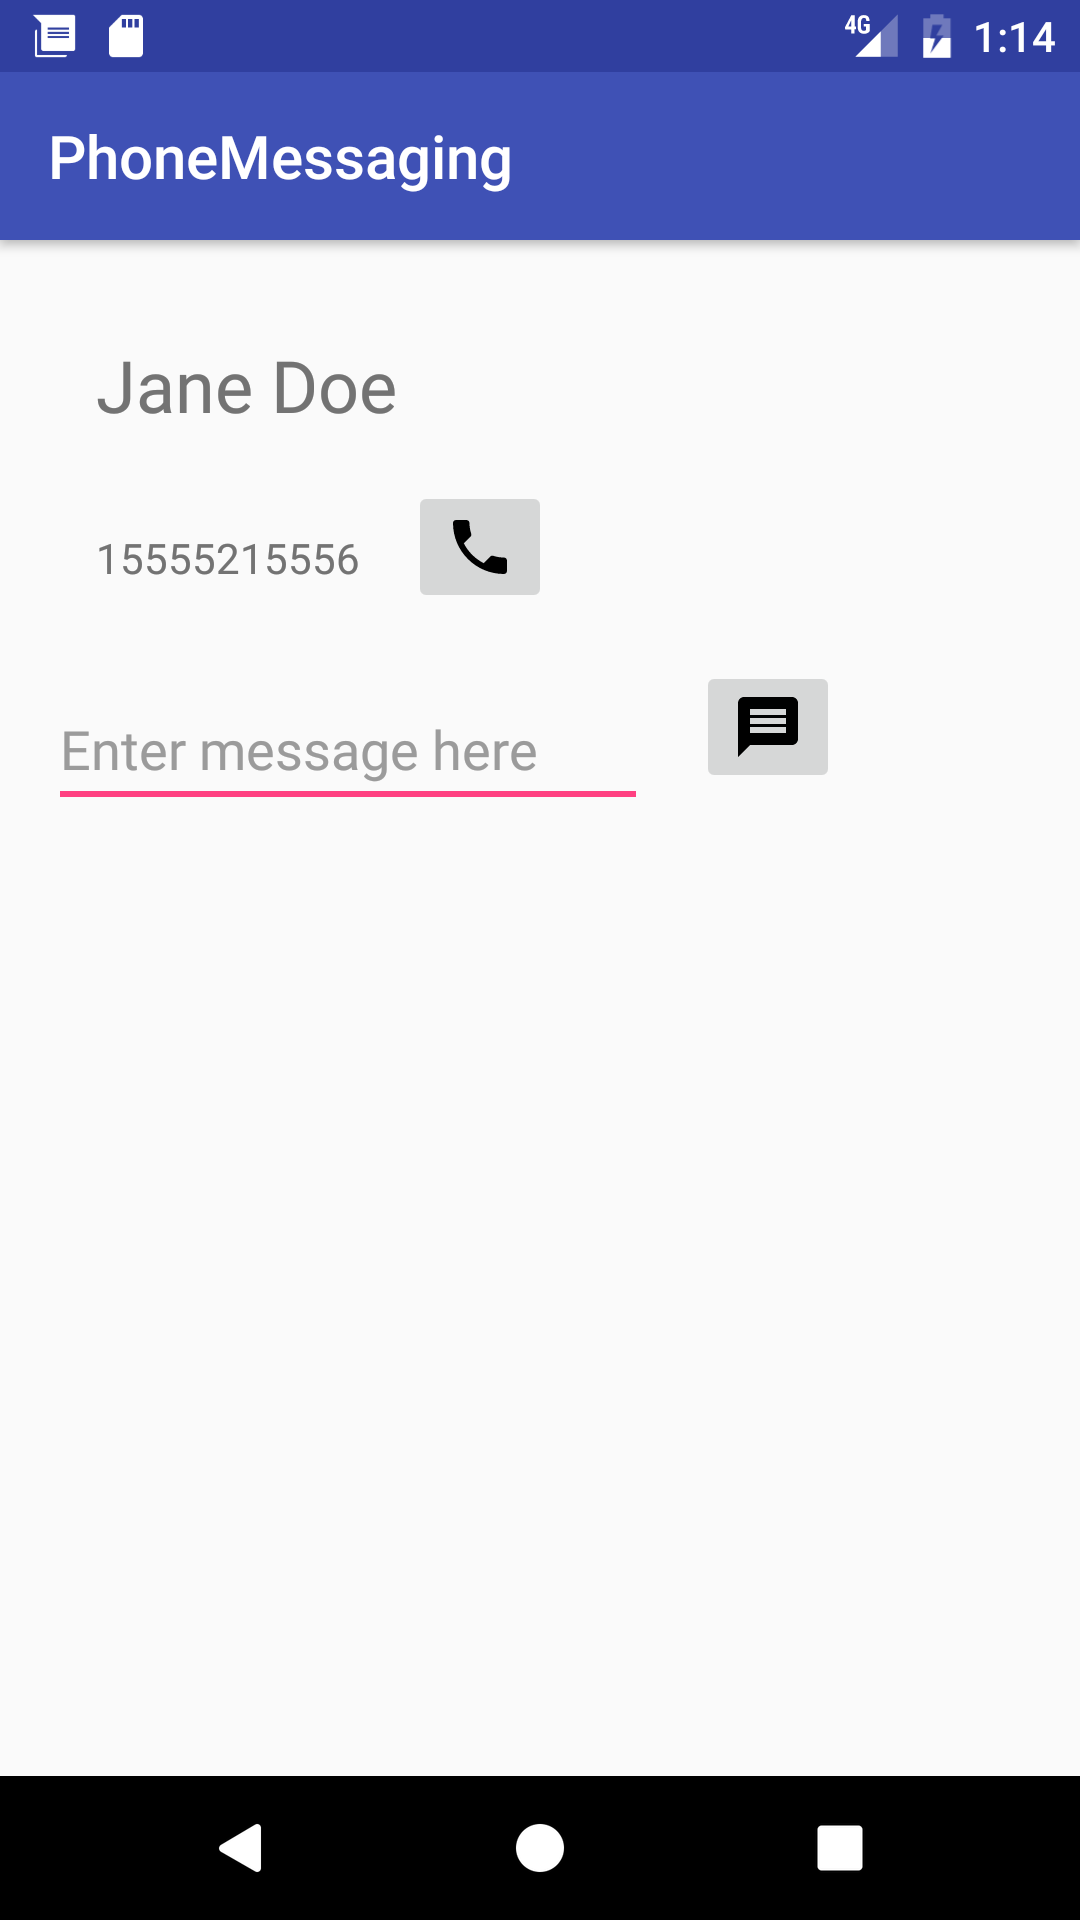 App layout with an EditText for the message and an ImageButton for the messaging icon